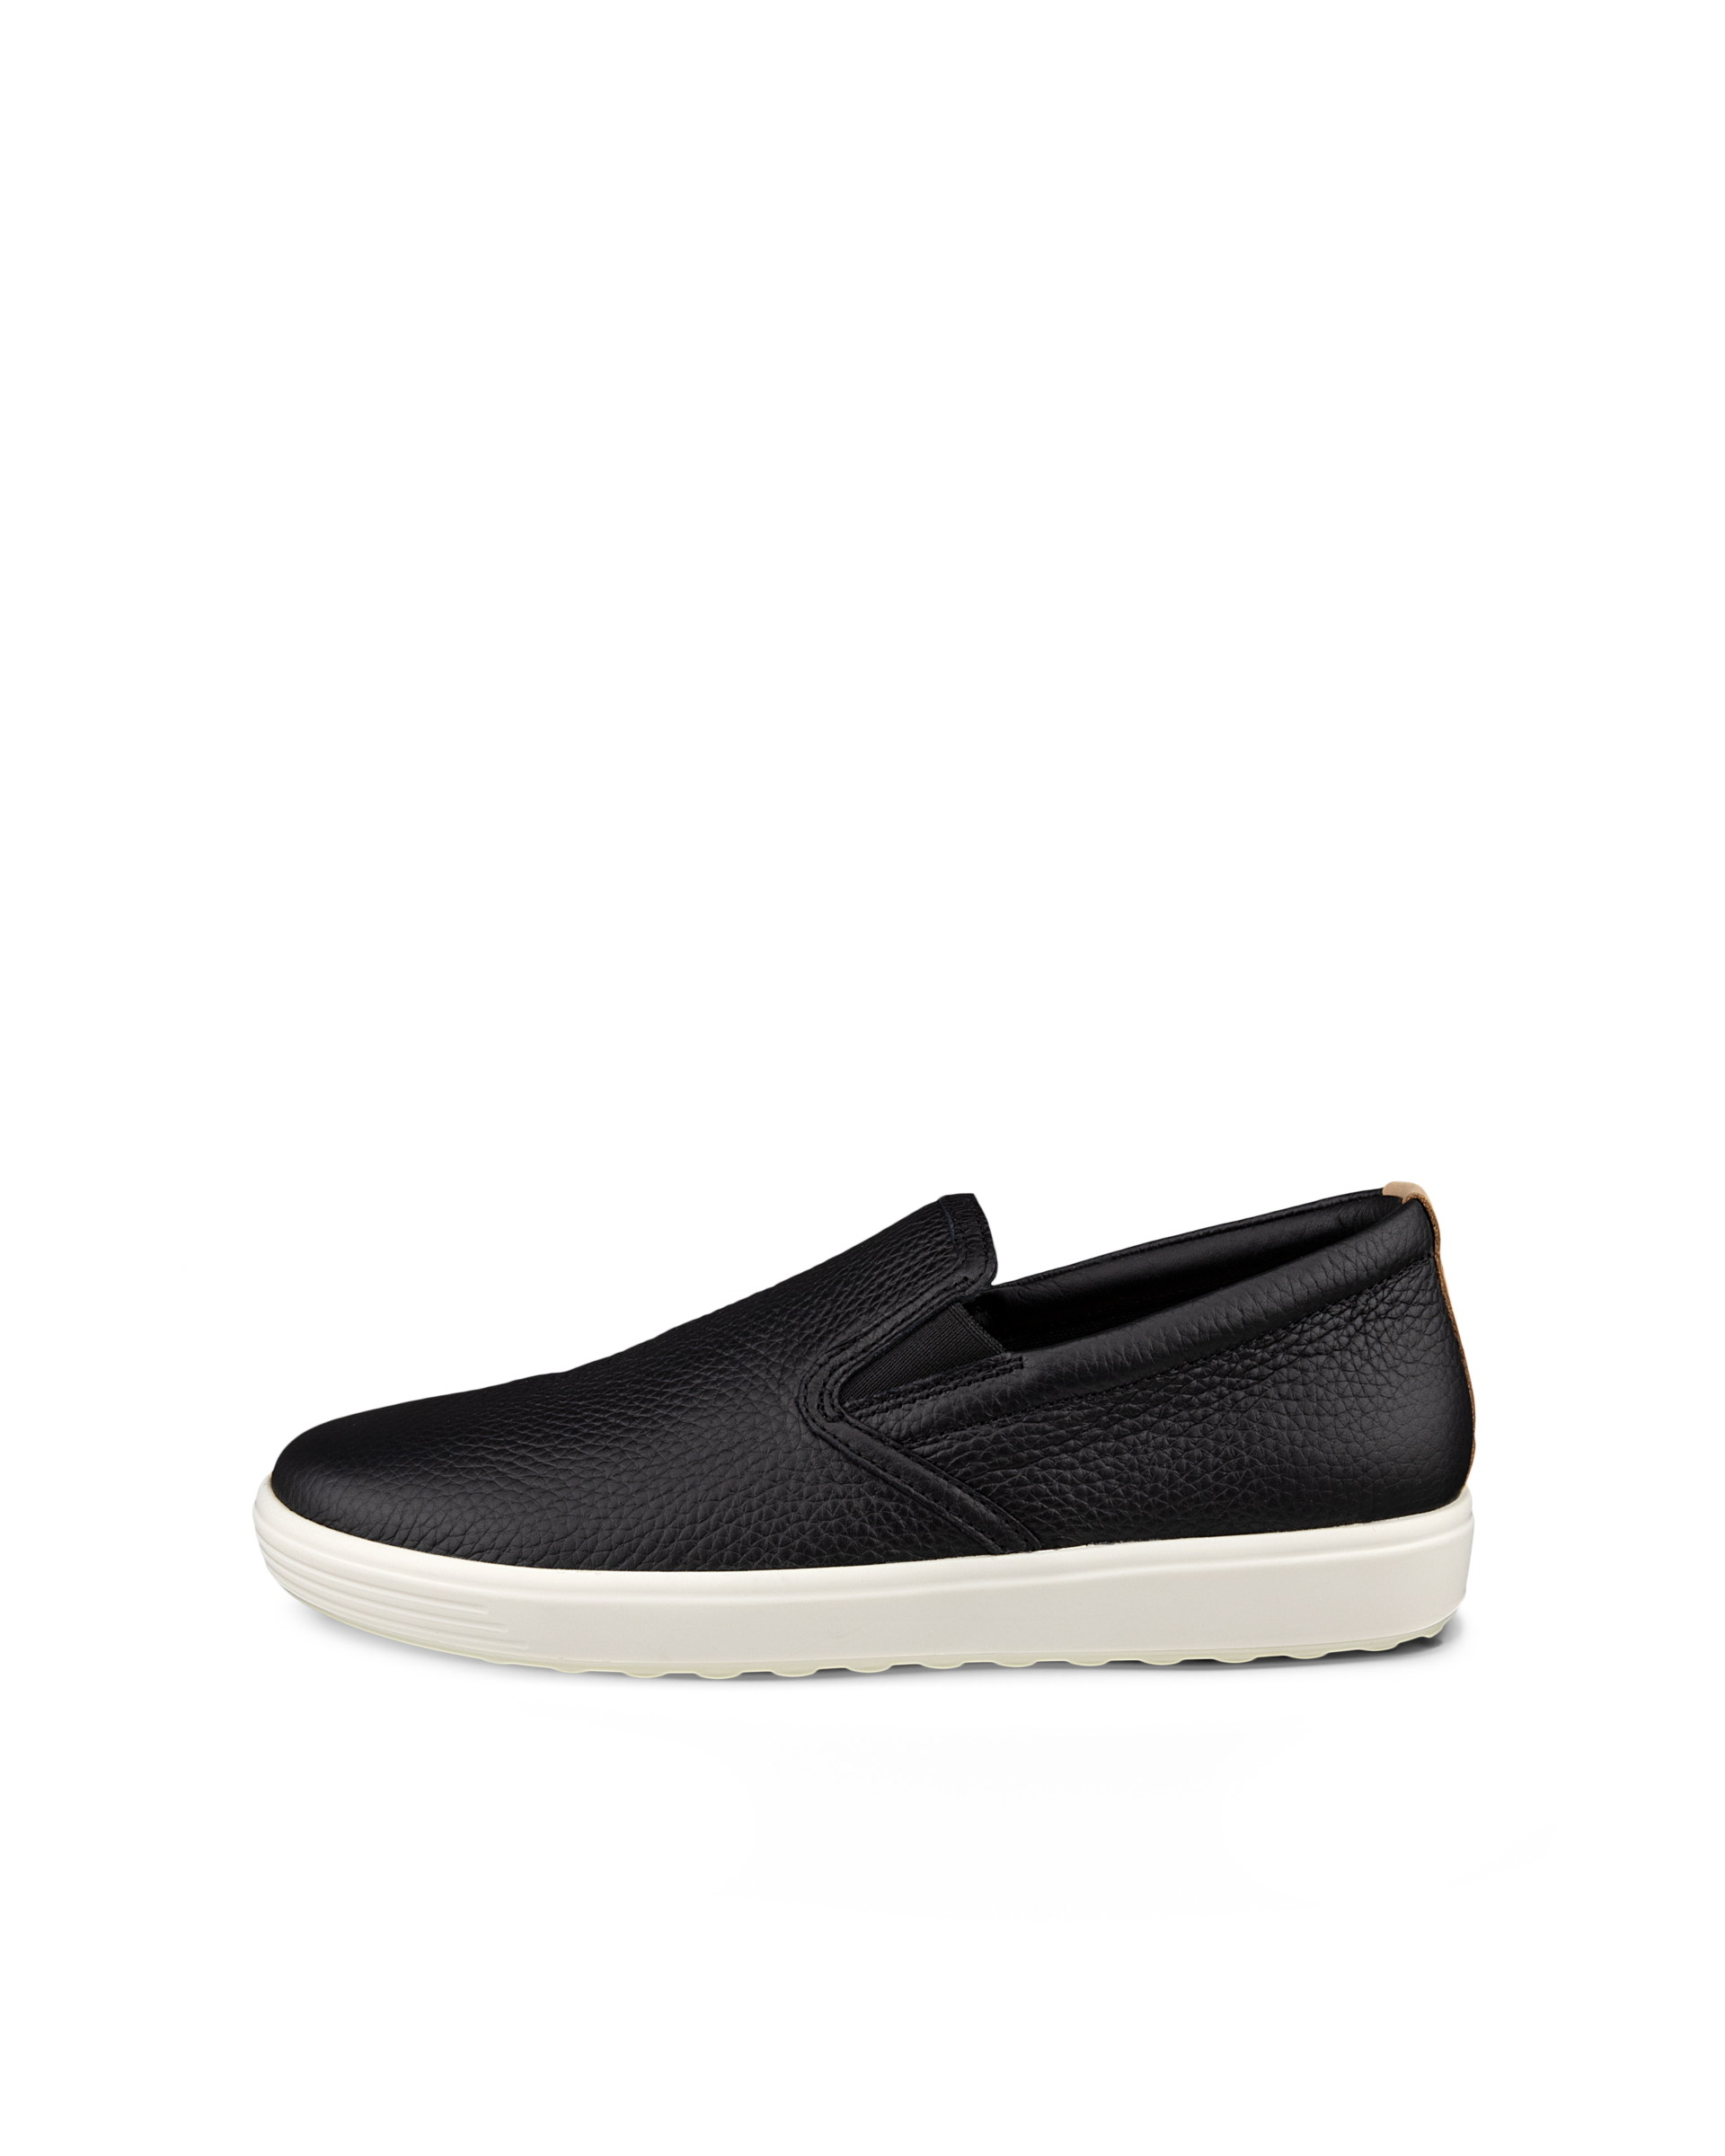 CARIUMA: Women's Quilted Slip-on Sneakers | SLIP-ON